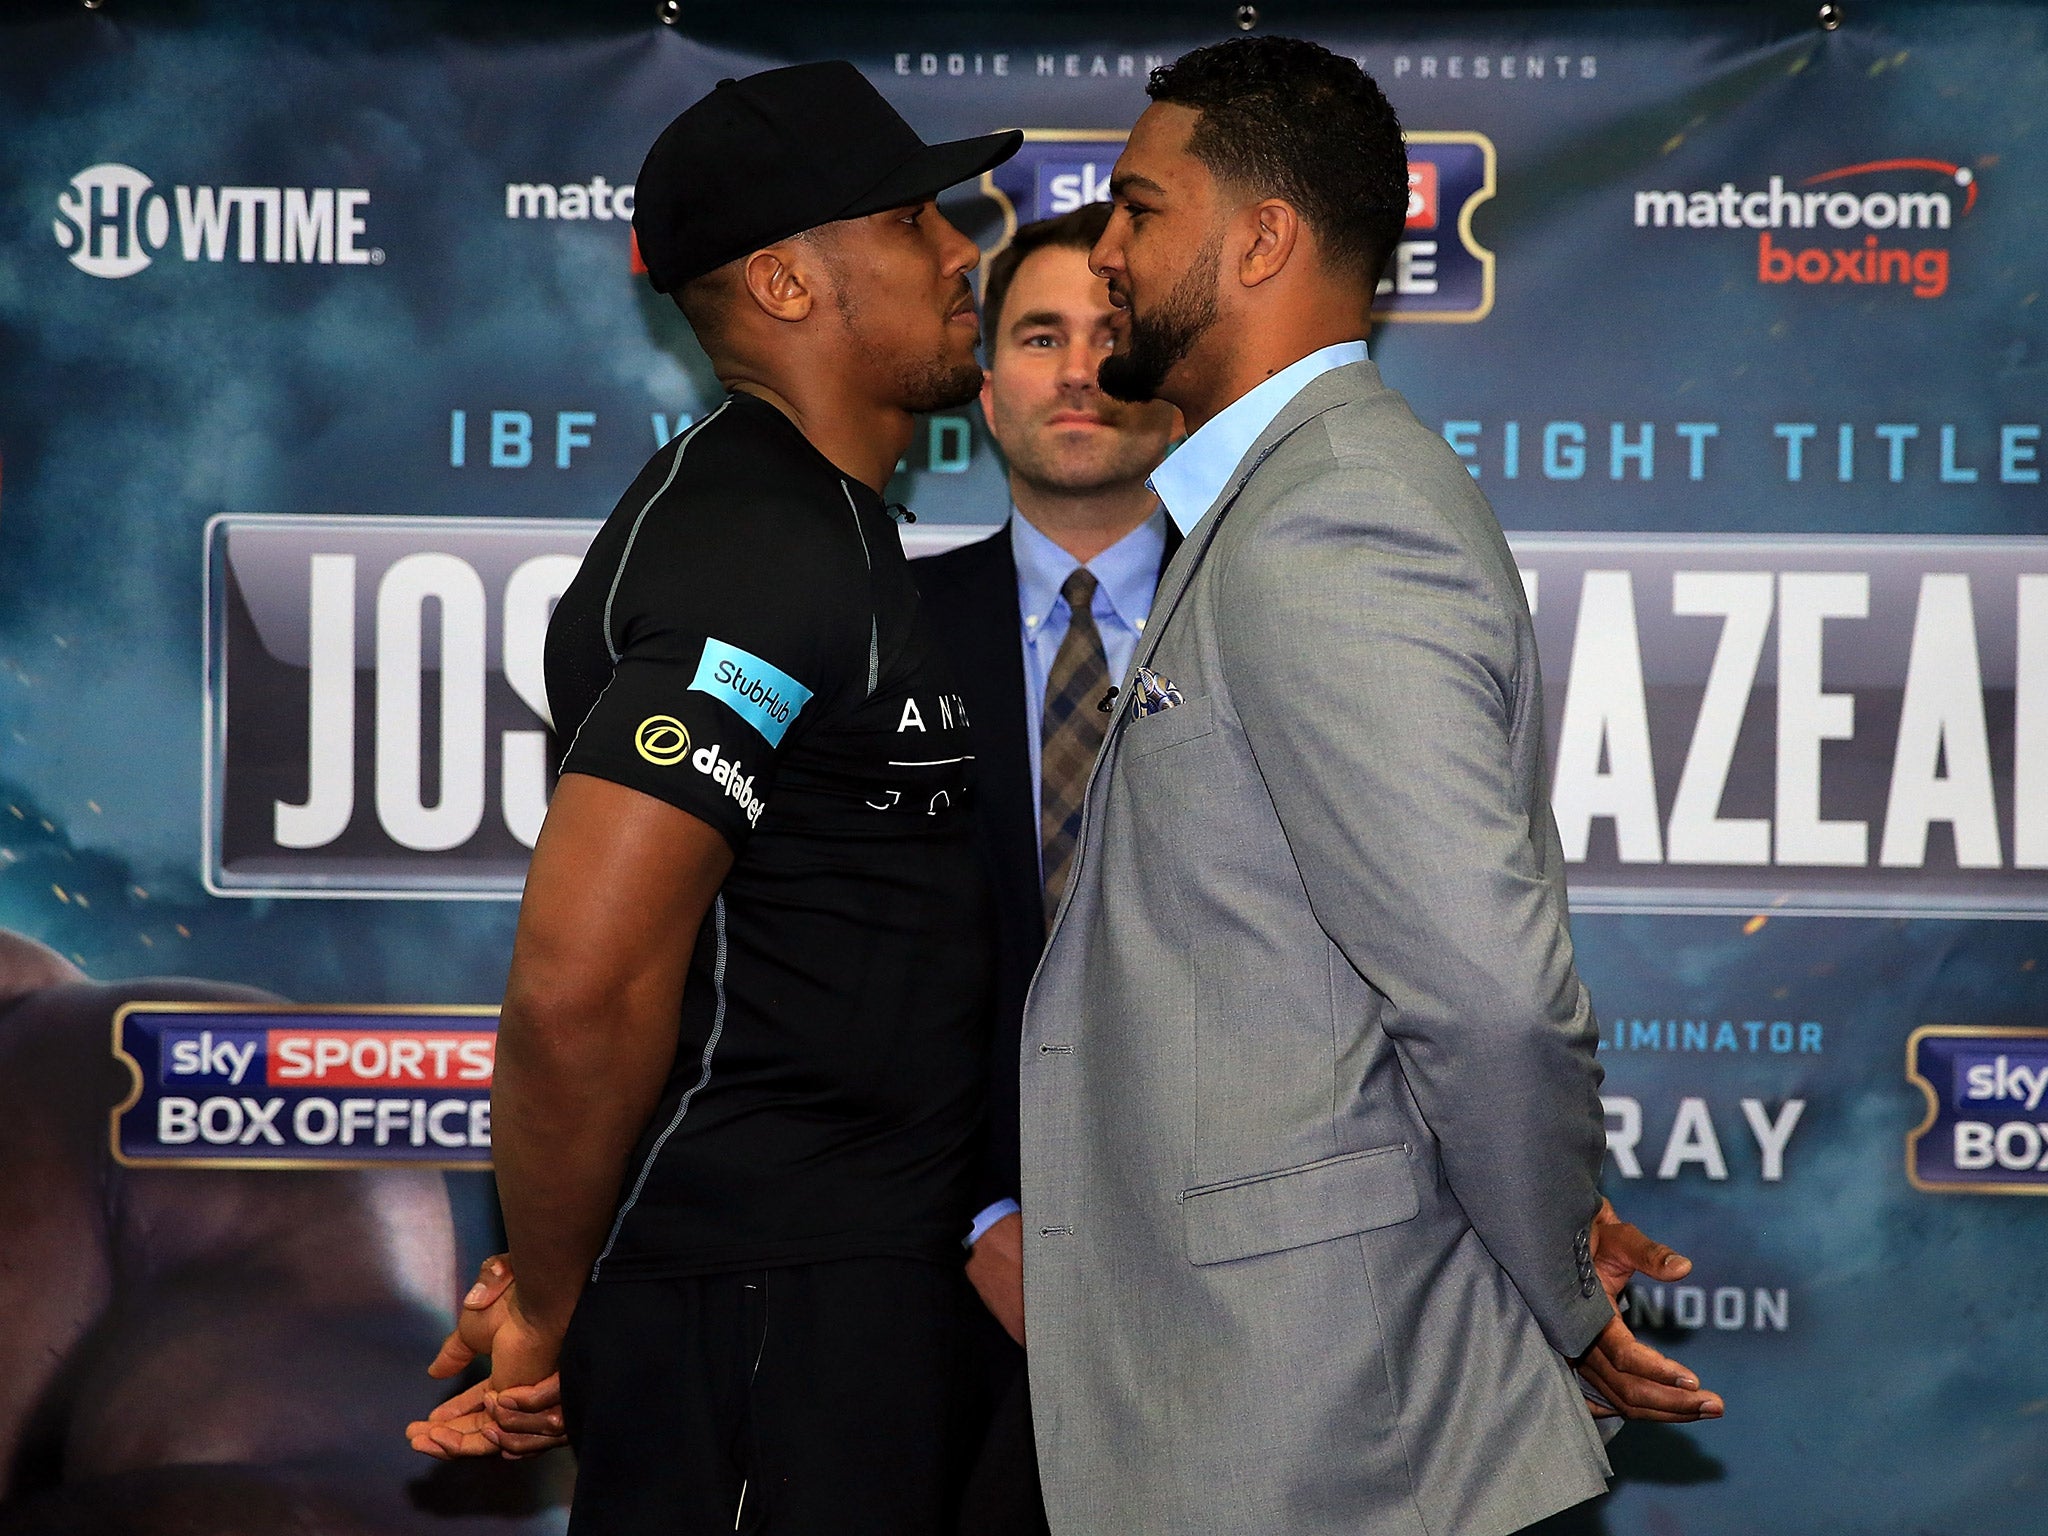 Anthony Joshua makes his first defence of the IBF world heavyweight title against Dominic Breazeale